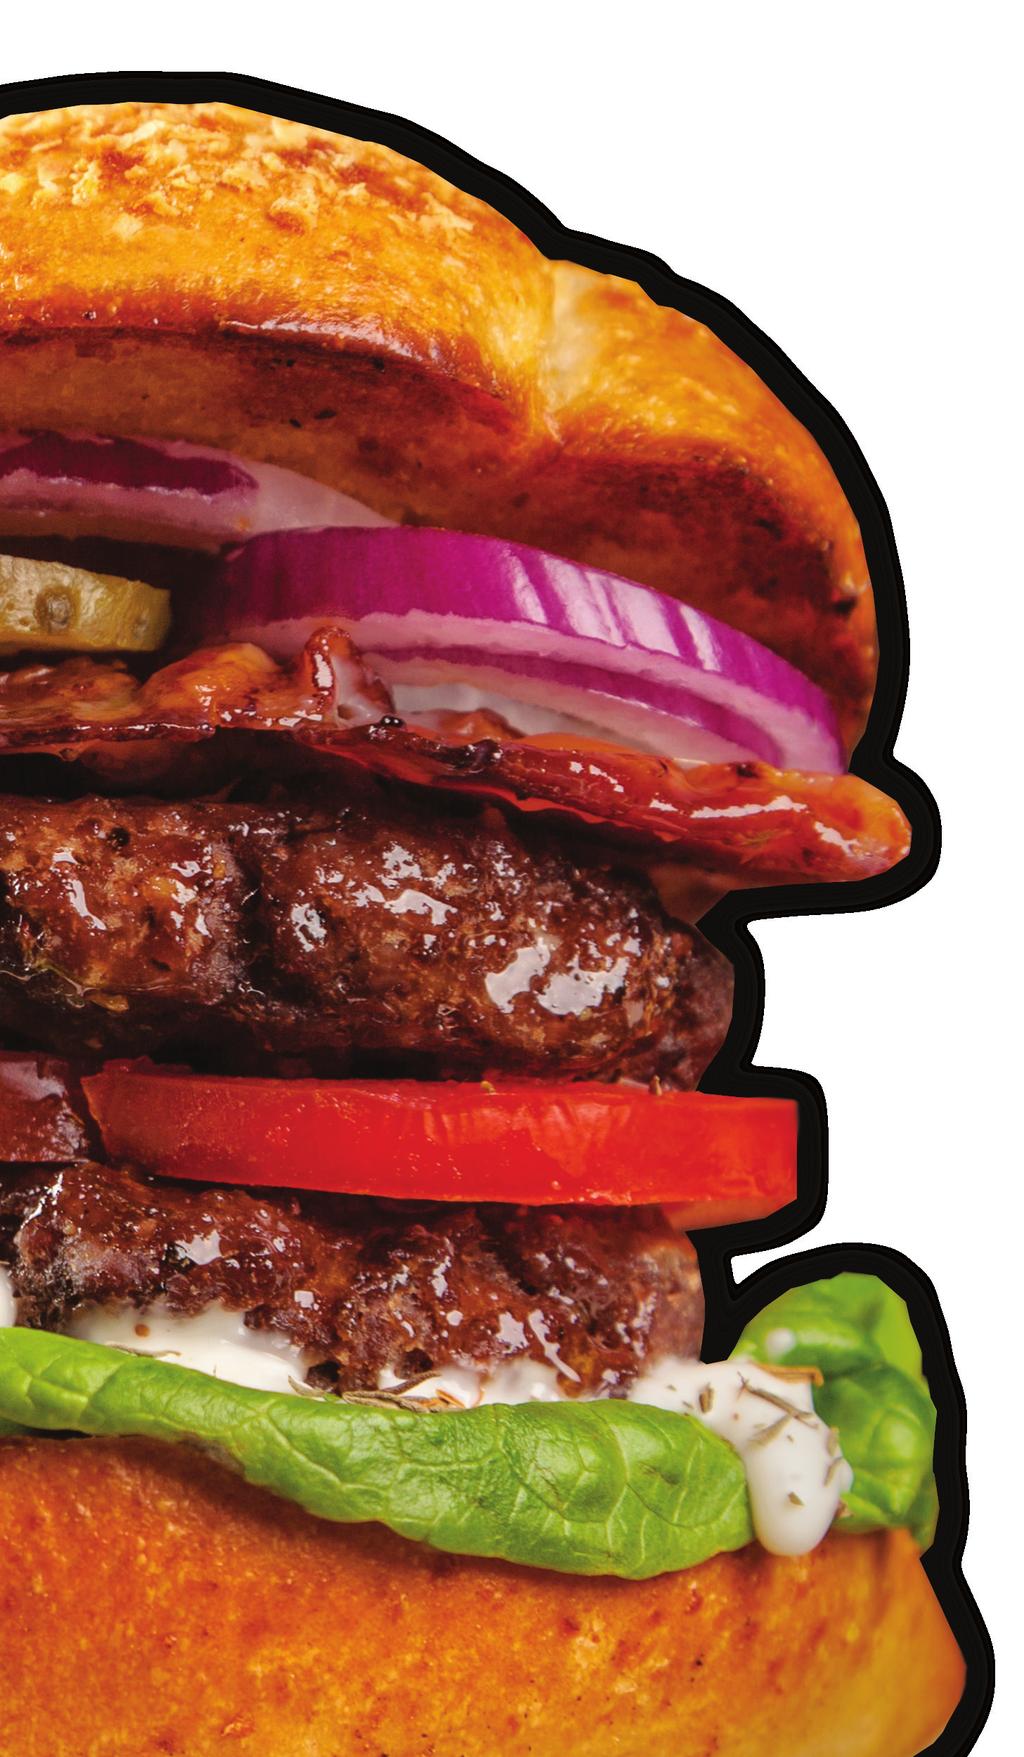 SEE ALL PRODUCTS AT DEVAULTFOODS.COM Build a Better Burger Making Consistently Delicious Burgers since 1949.